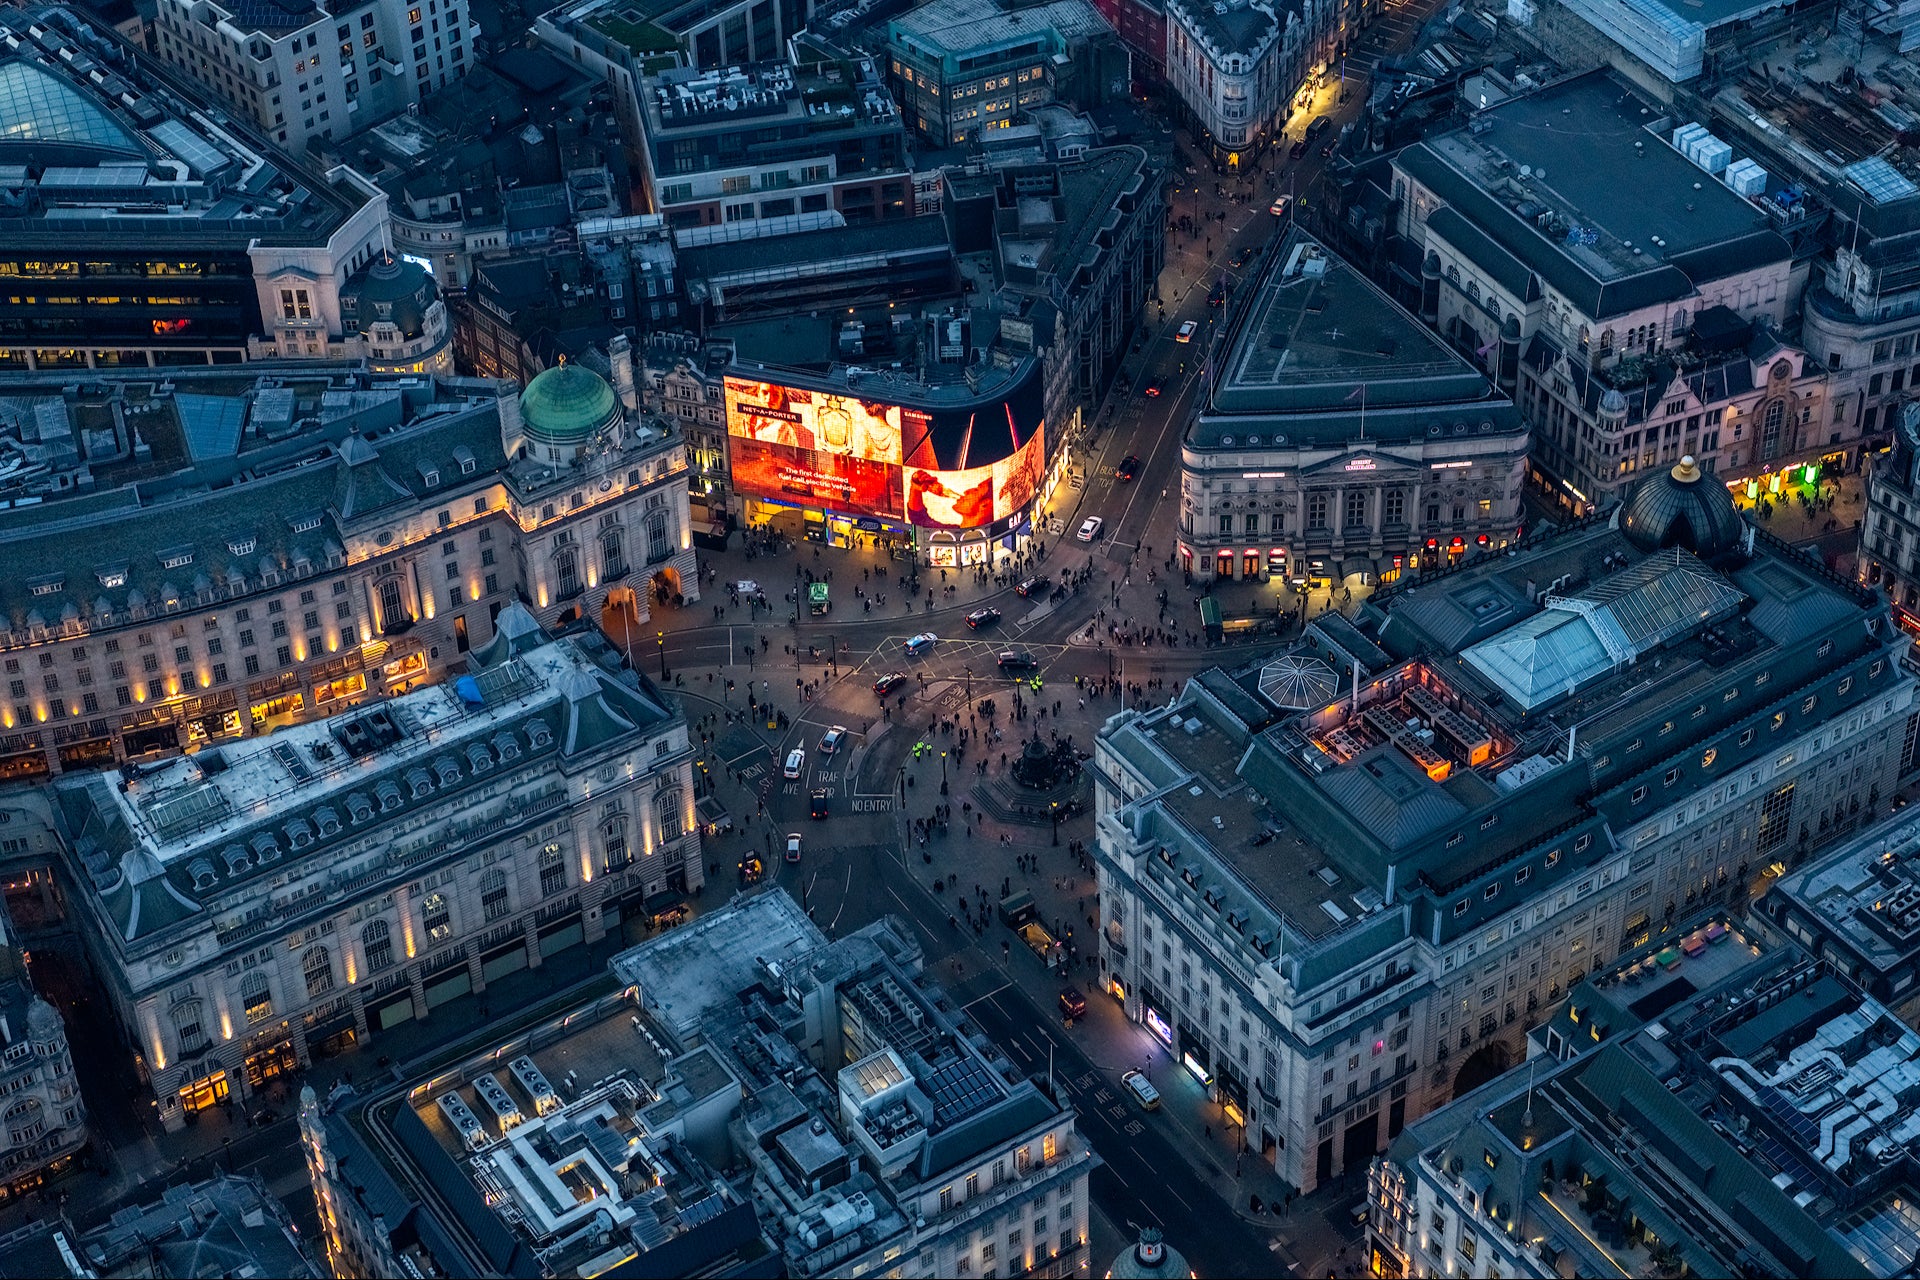 Circus Nights (Dusk over Piccadilly Circus)